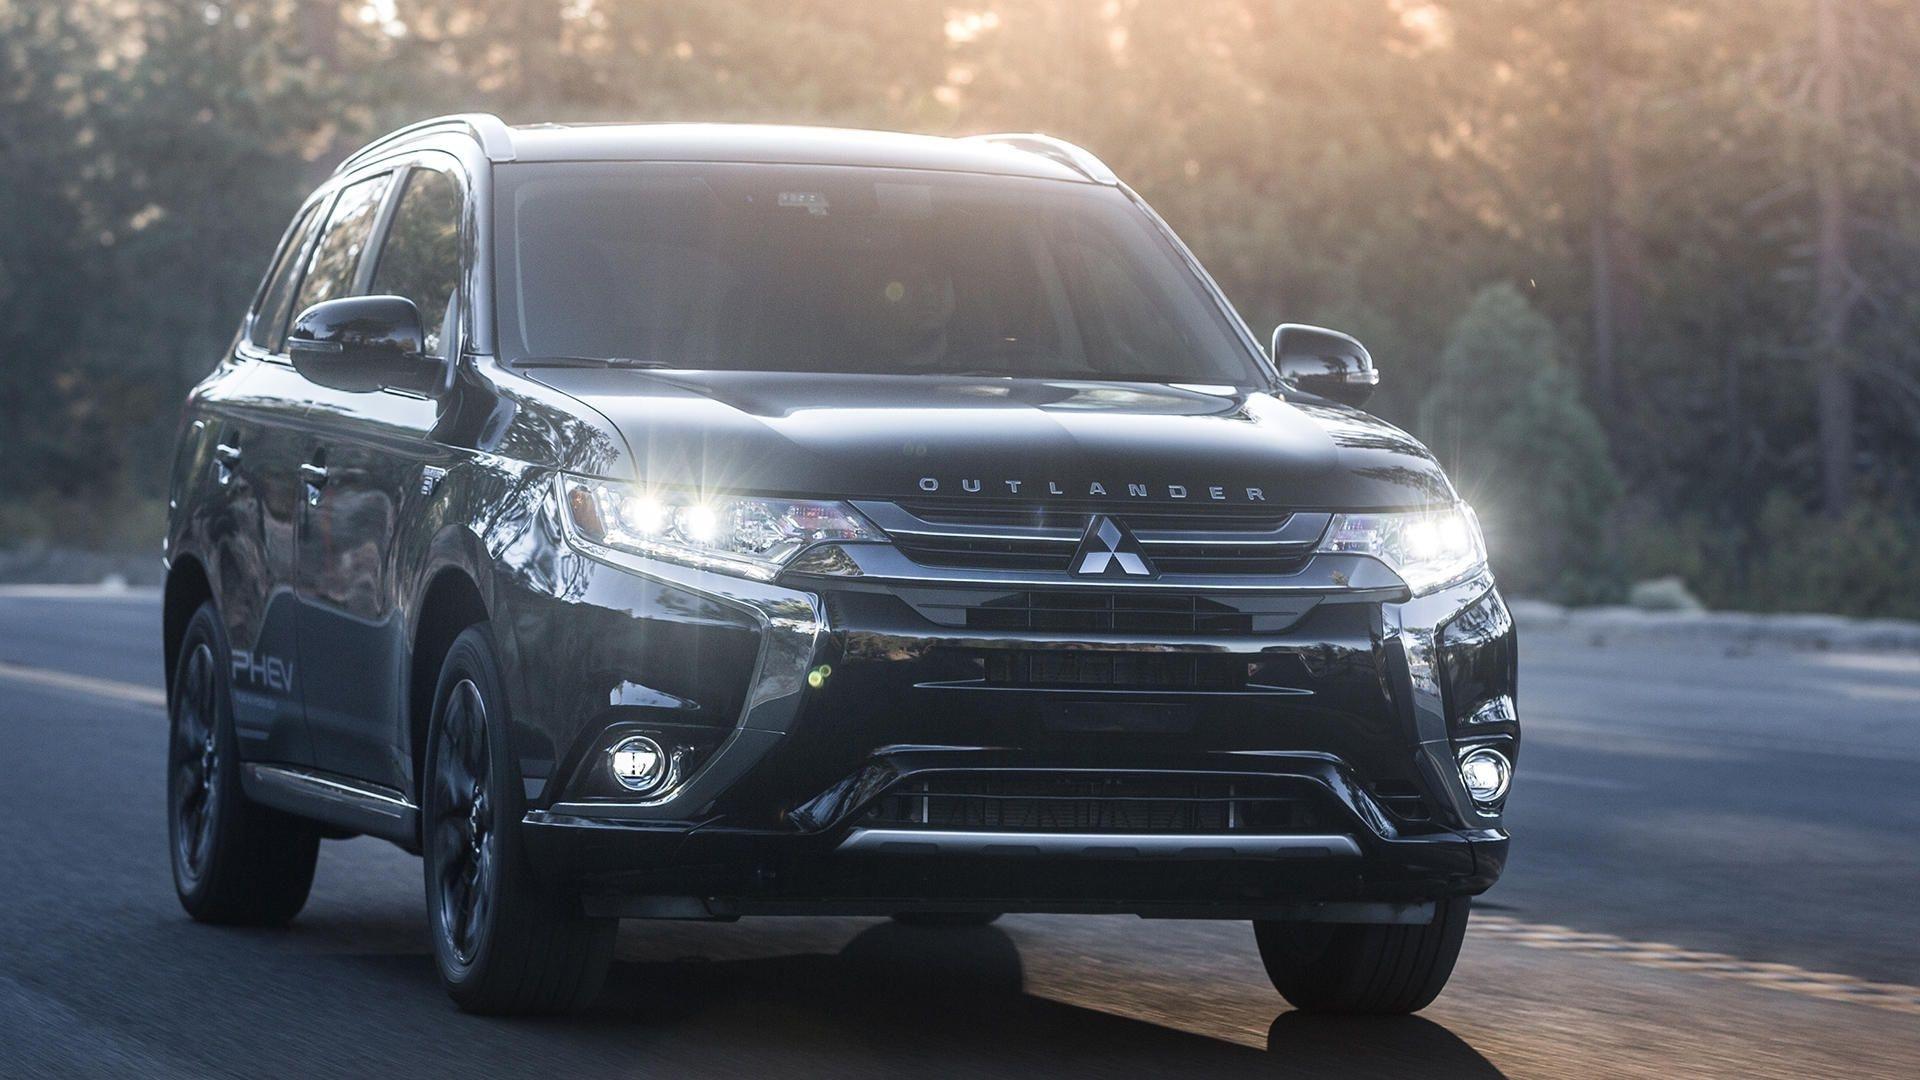 New 2019 Mitsubishi Outlander Sel Redesign. Car Review 2019